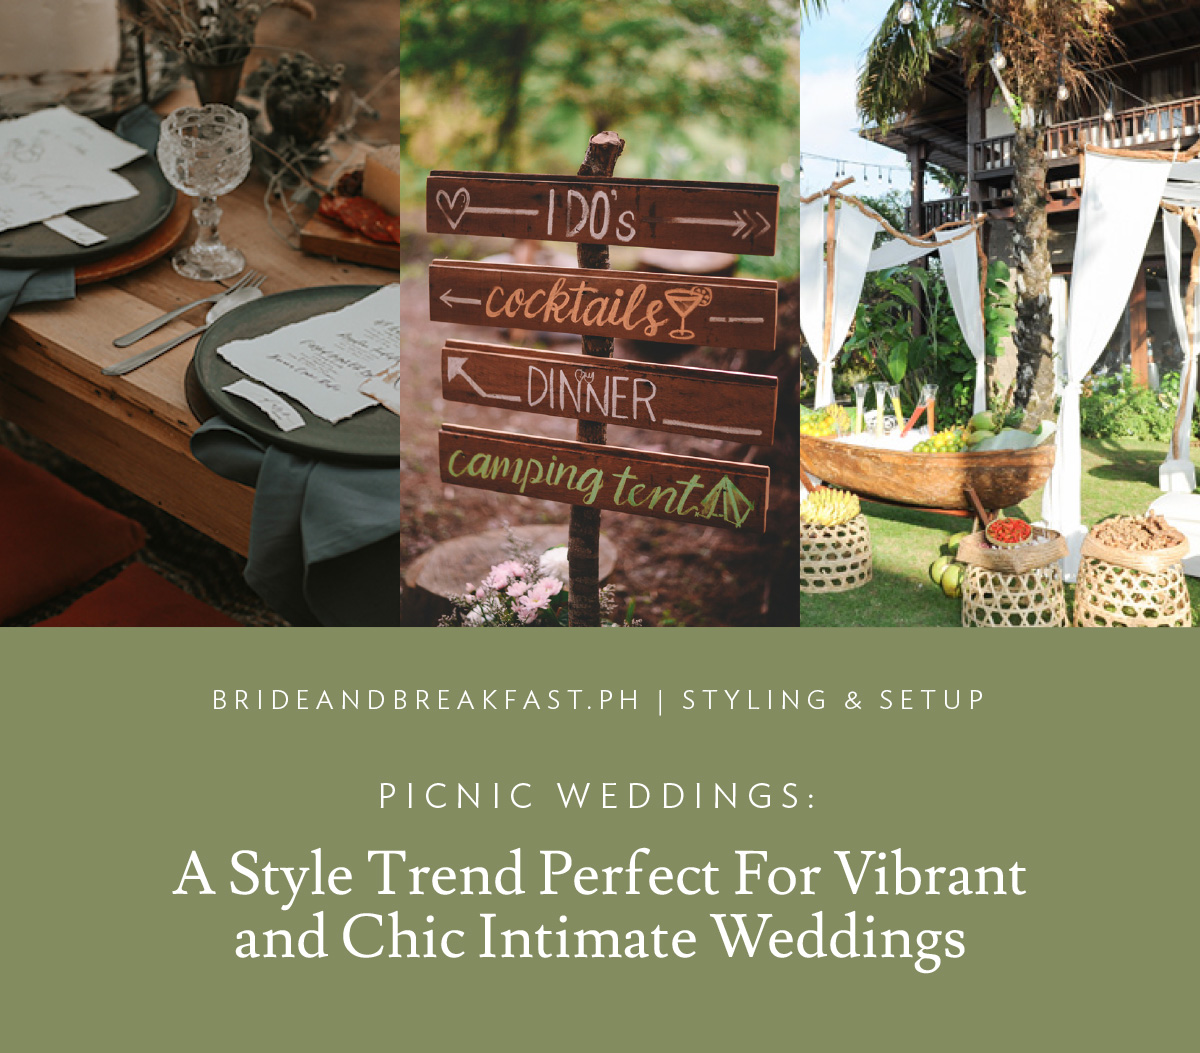 Picnic Weddings: A Style Trend Perfect For Vibrant and Chic Intimate Weddings